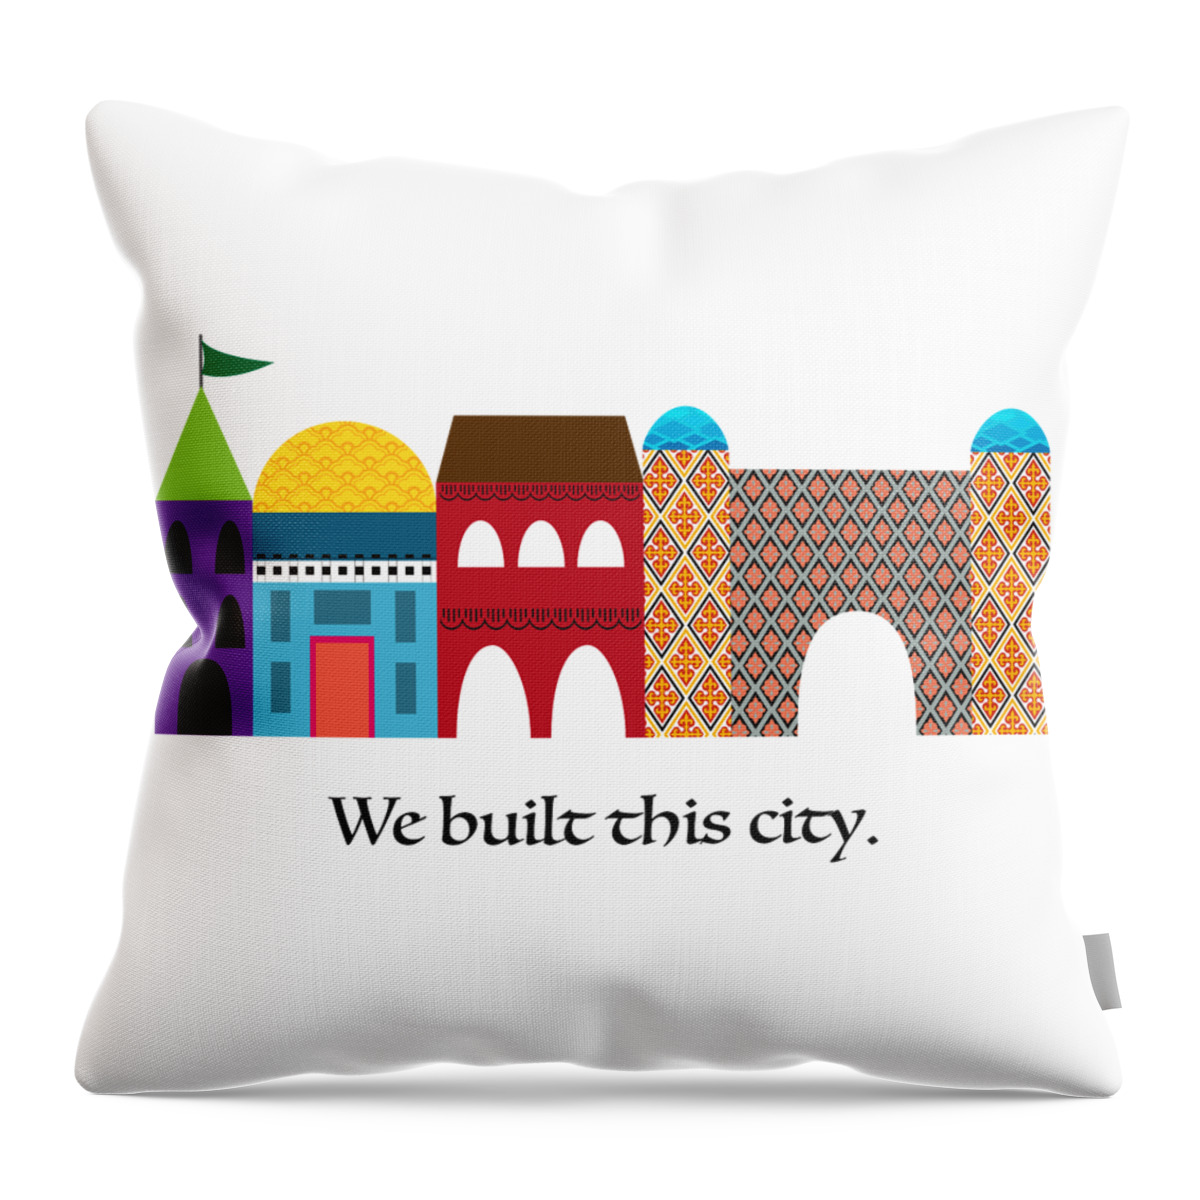 We Built This City Throw Pillow featuring the digital art We Built This City by Randi Kuhne